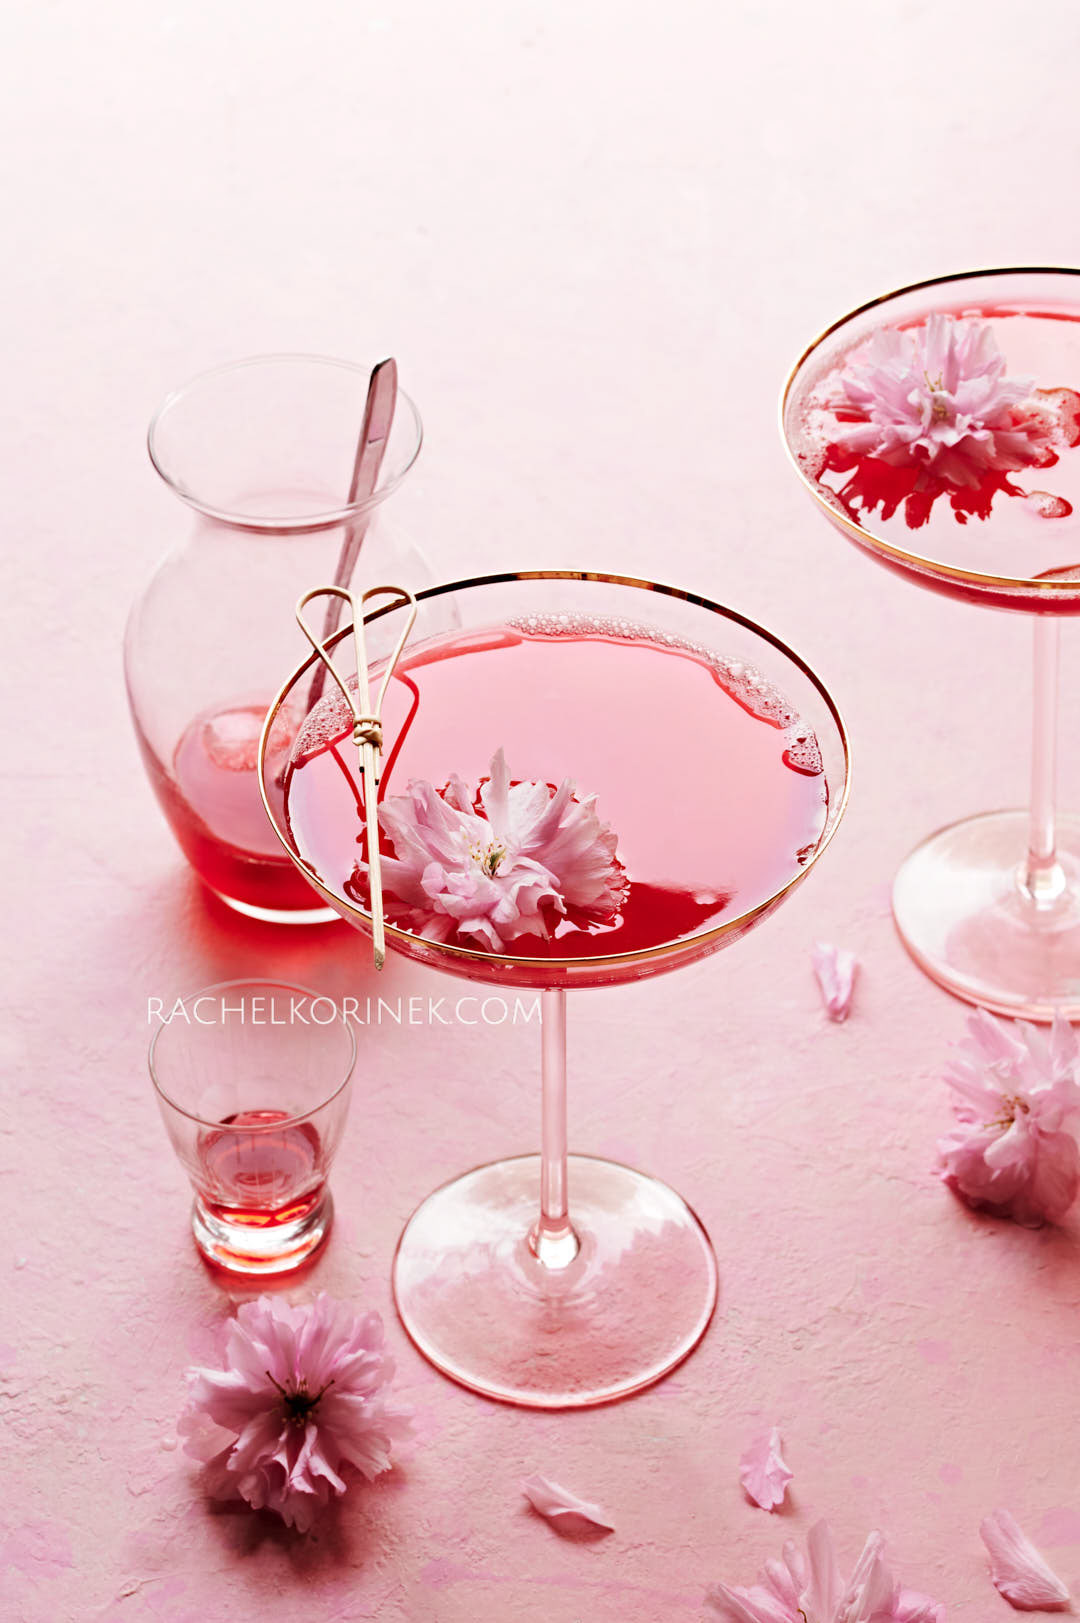 cocktail photography food photographer food photography food styling food stylist pink drink cocktails still life